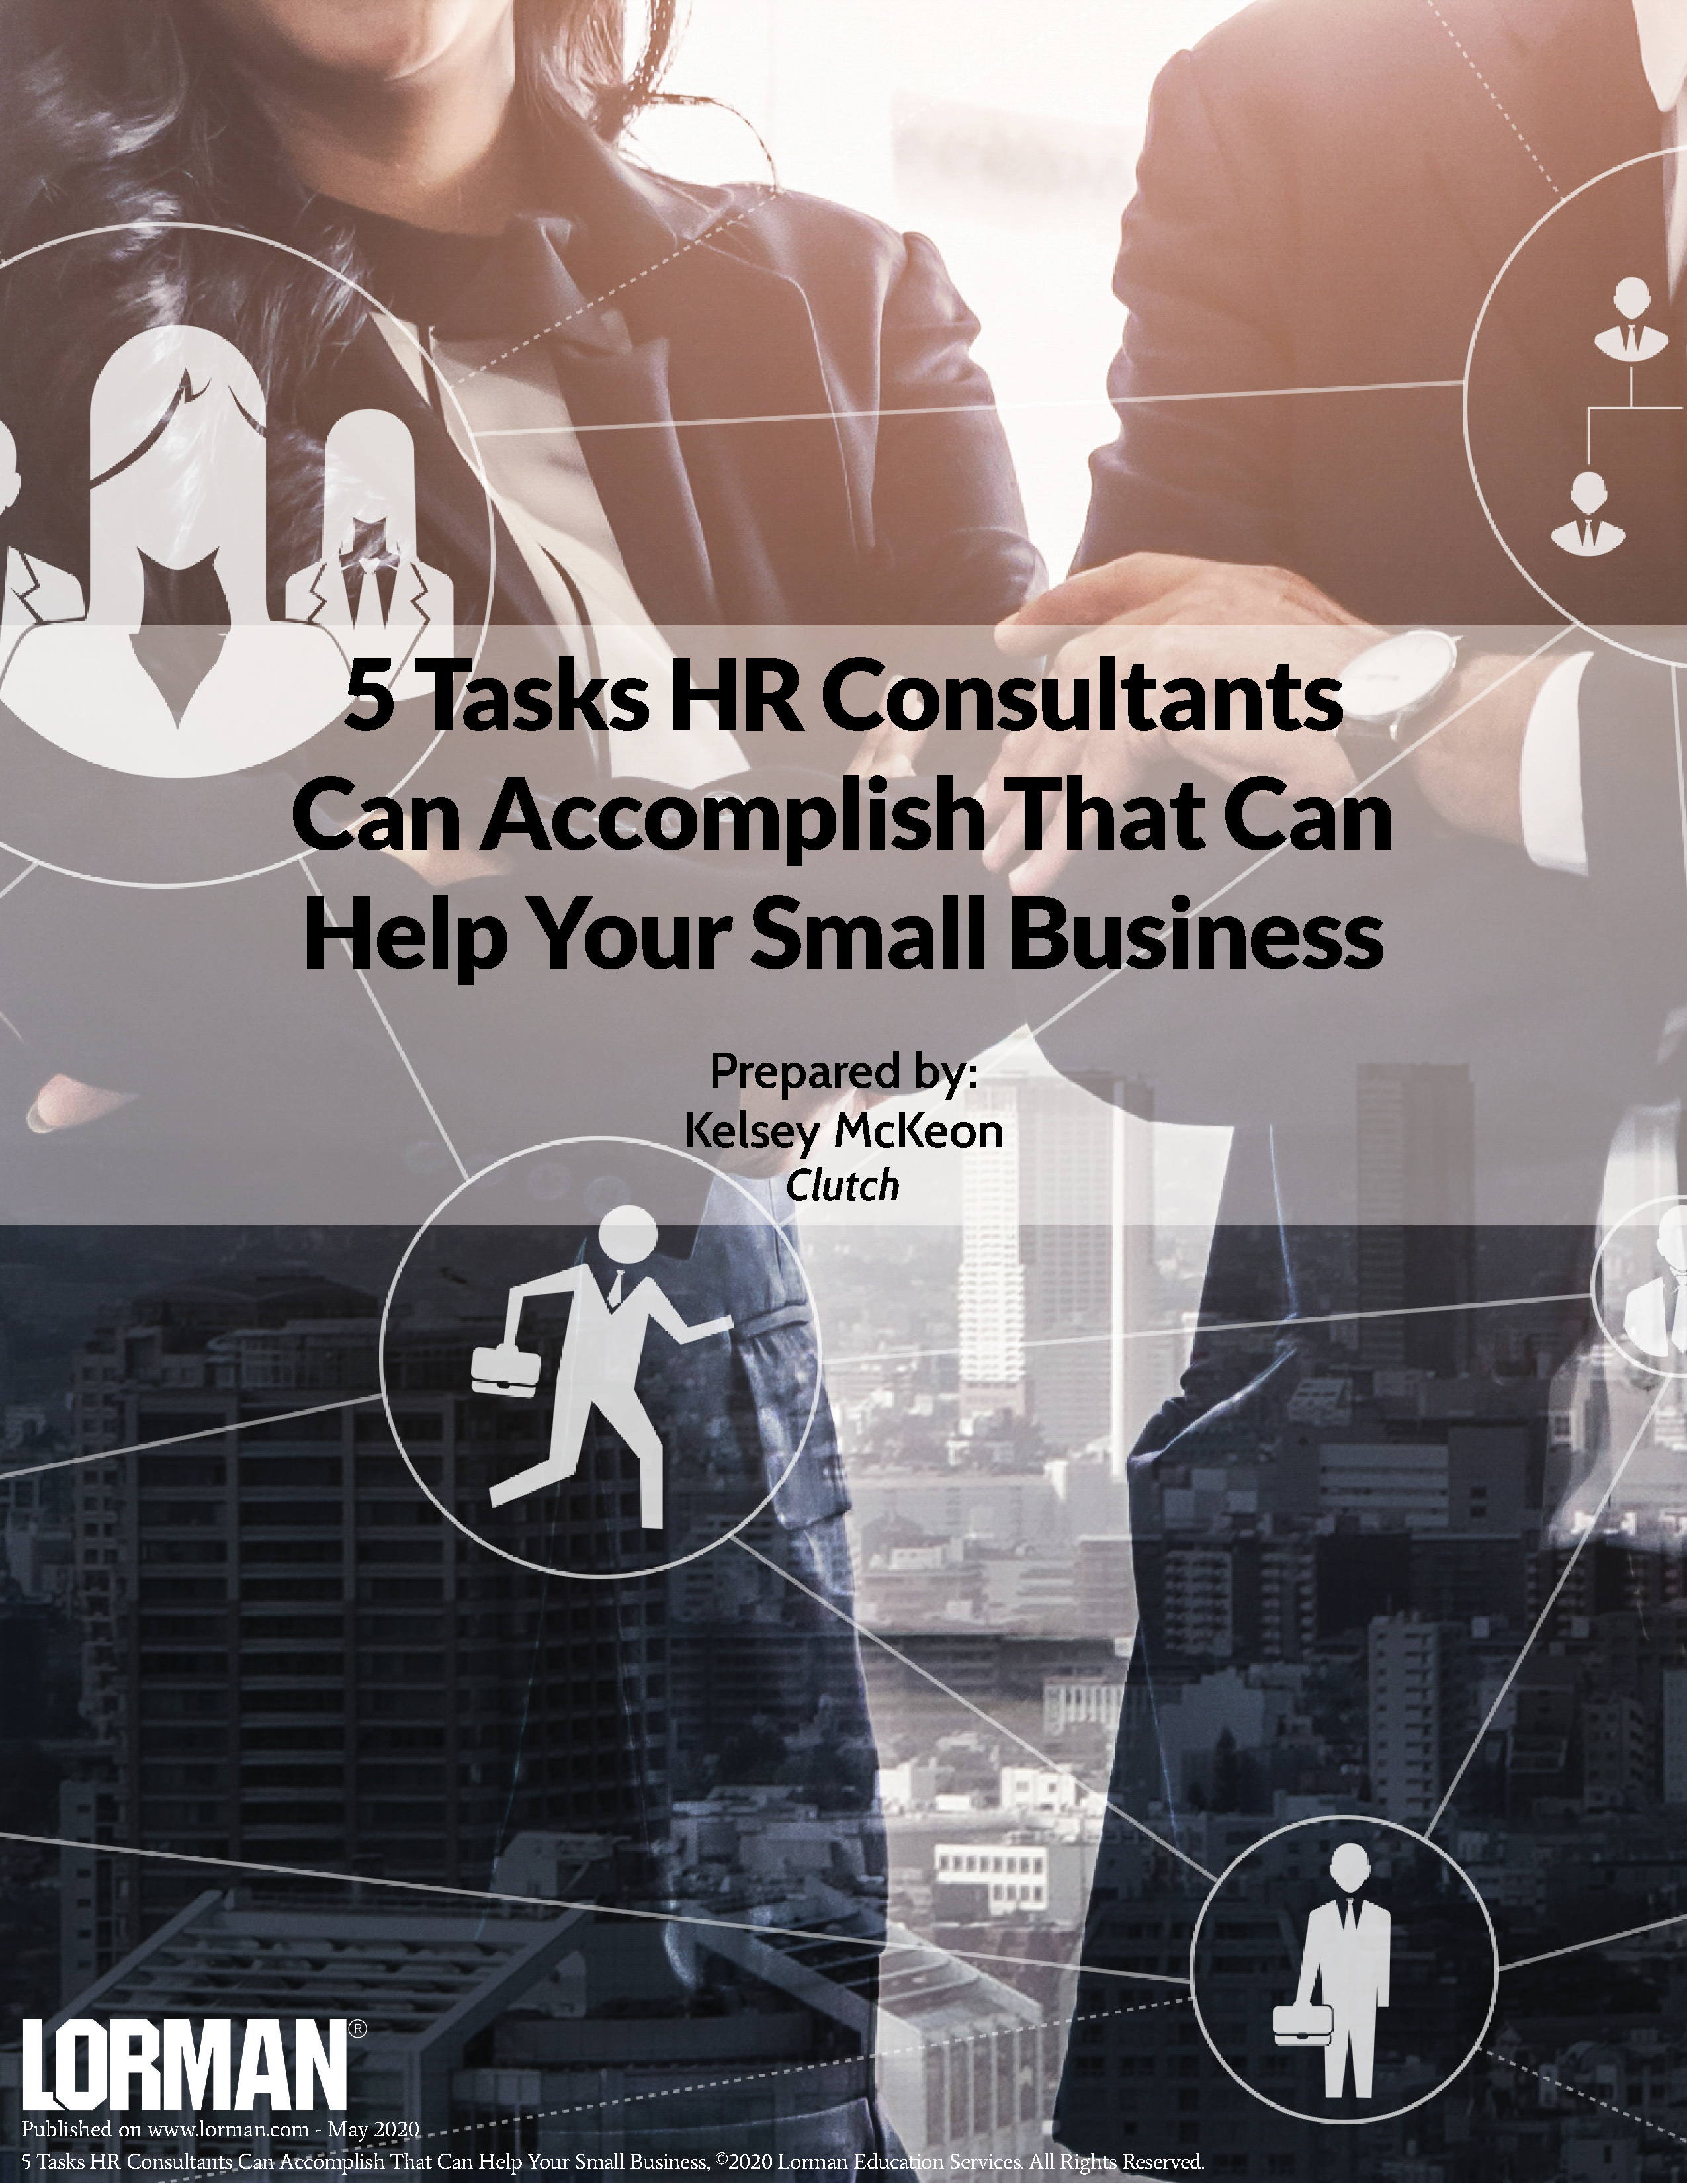 5 Tasks HR Consultants Can Accomplish That Can Help Your Small Business